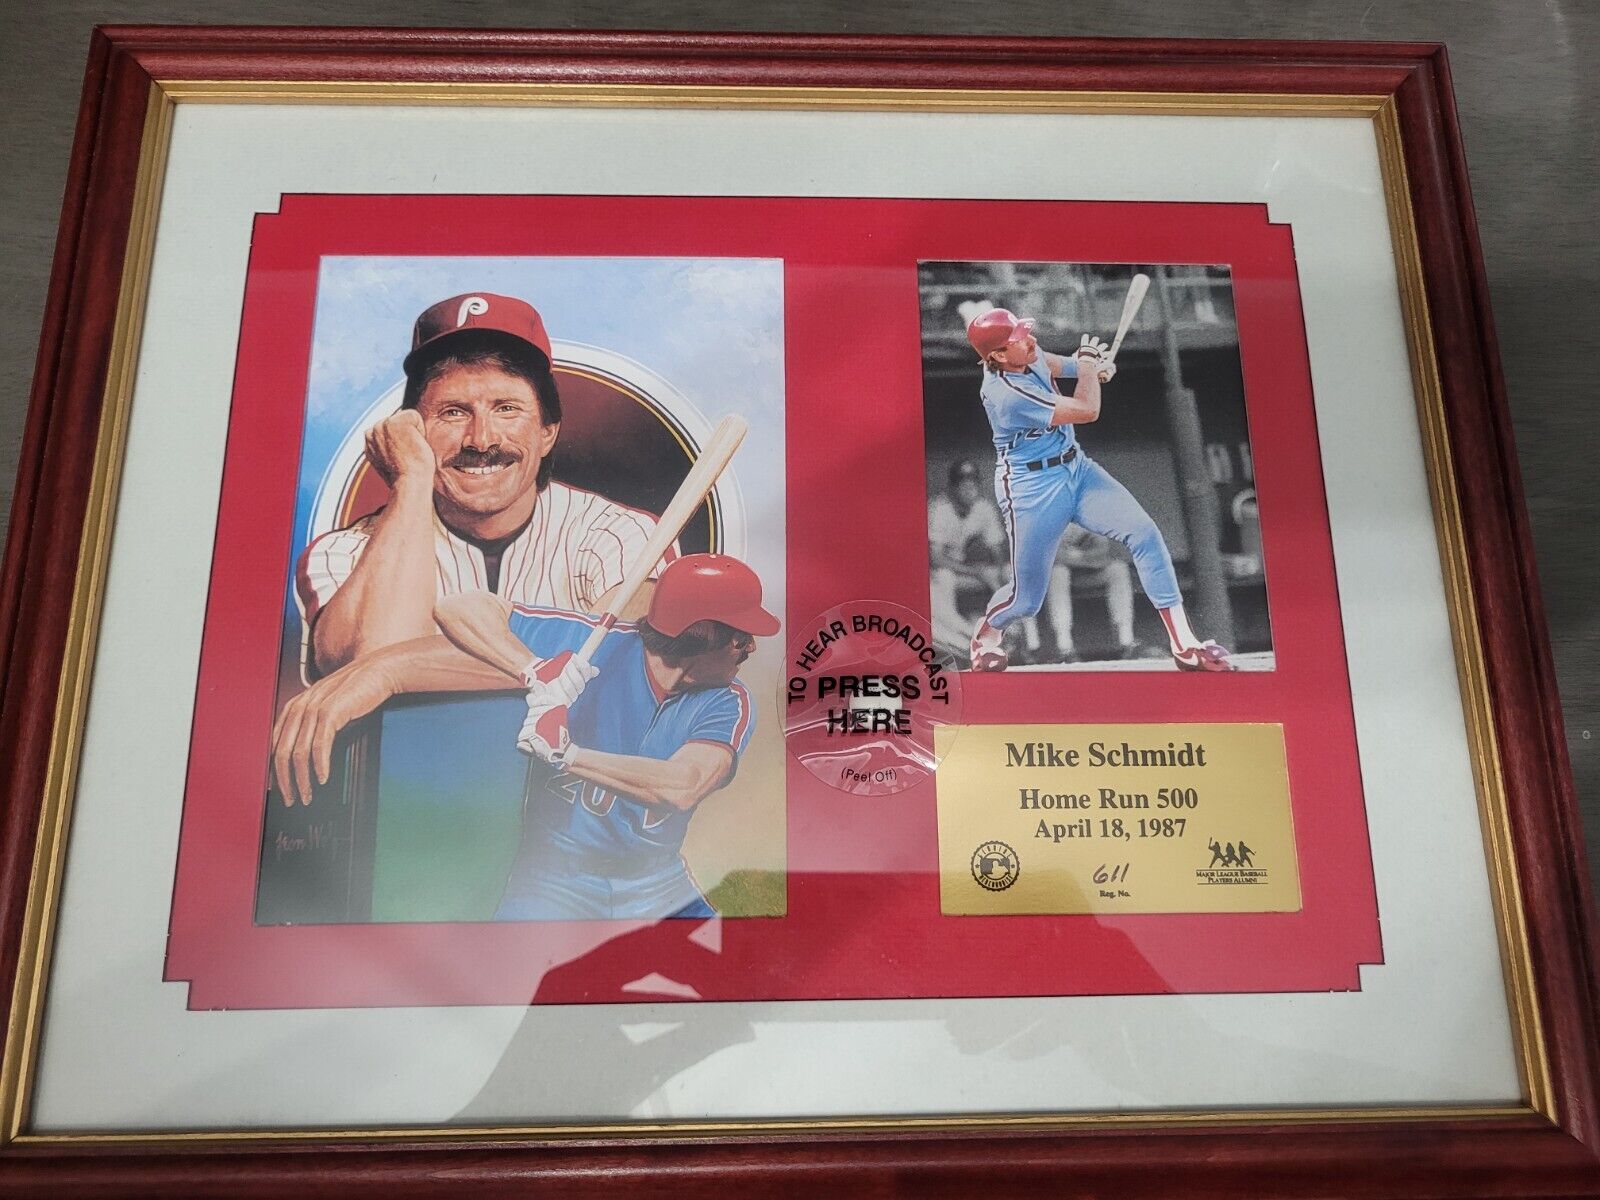 Mike Schmidt Photos and frame with narration voice of the home run 500